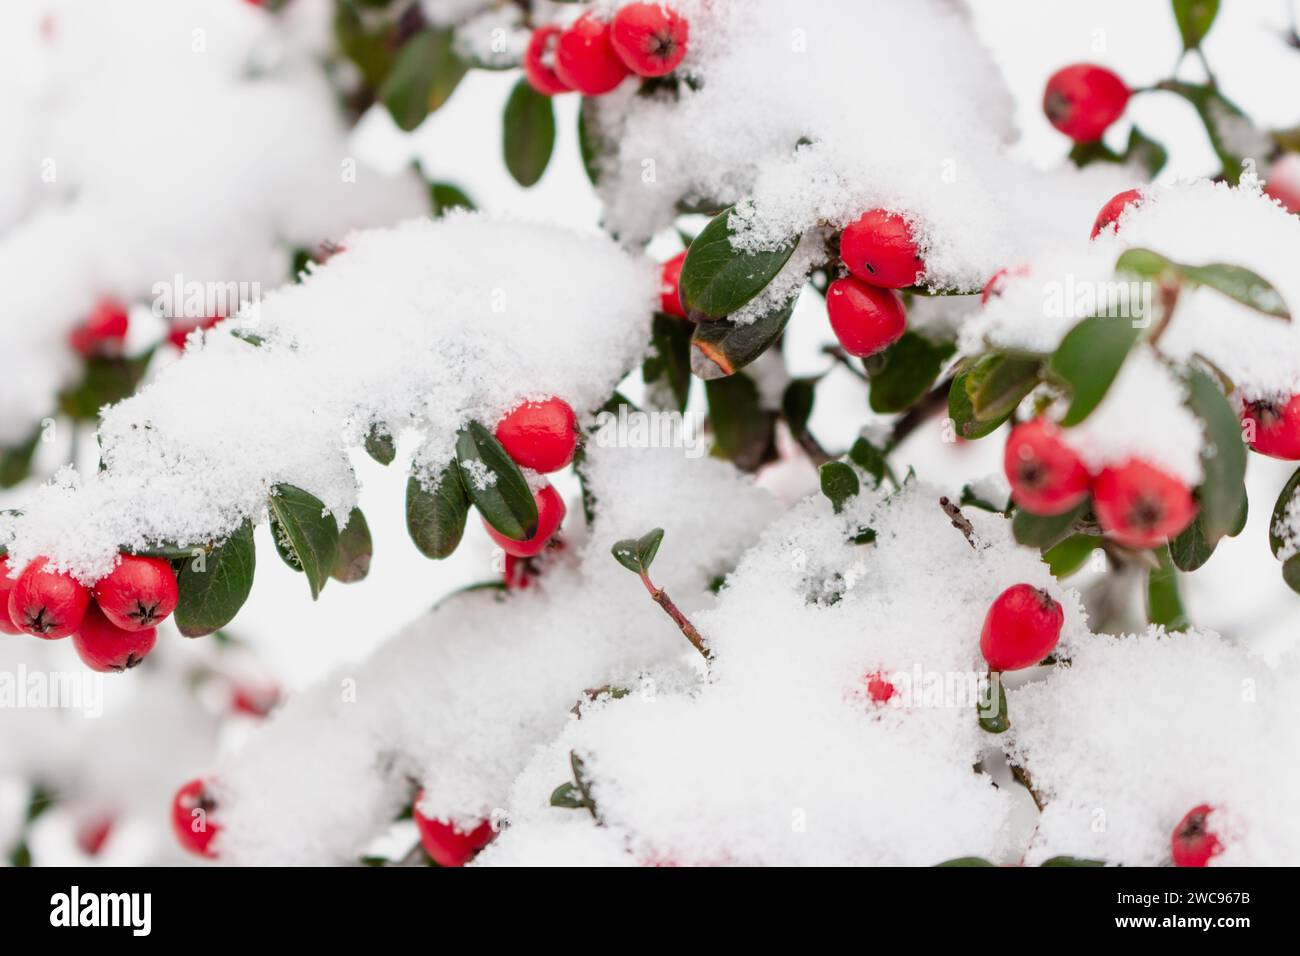 Red berries in snow. Frost on red berries with green leaves. Frozen nature. February landscape. Winter in parkland. Snowy forest in details. Stock Photo